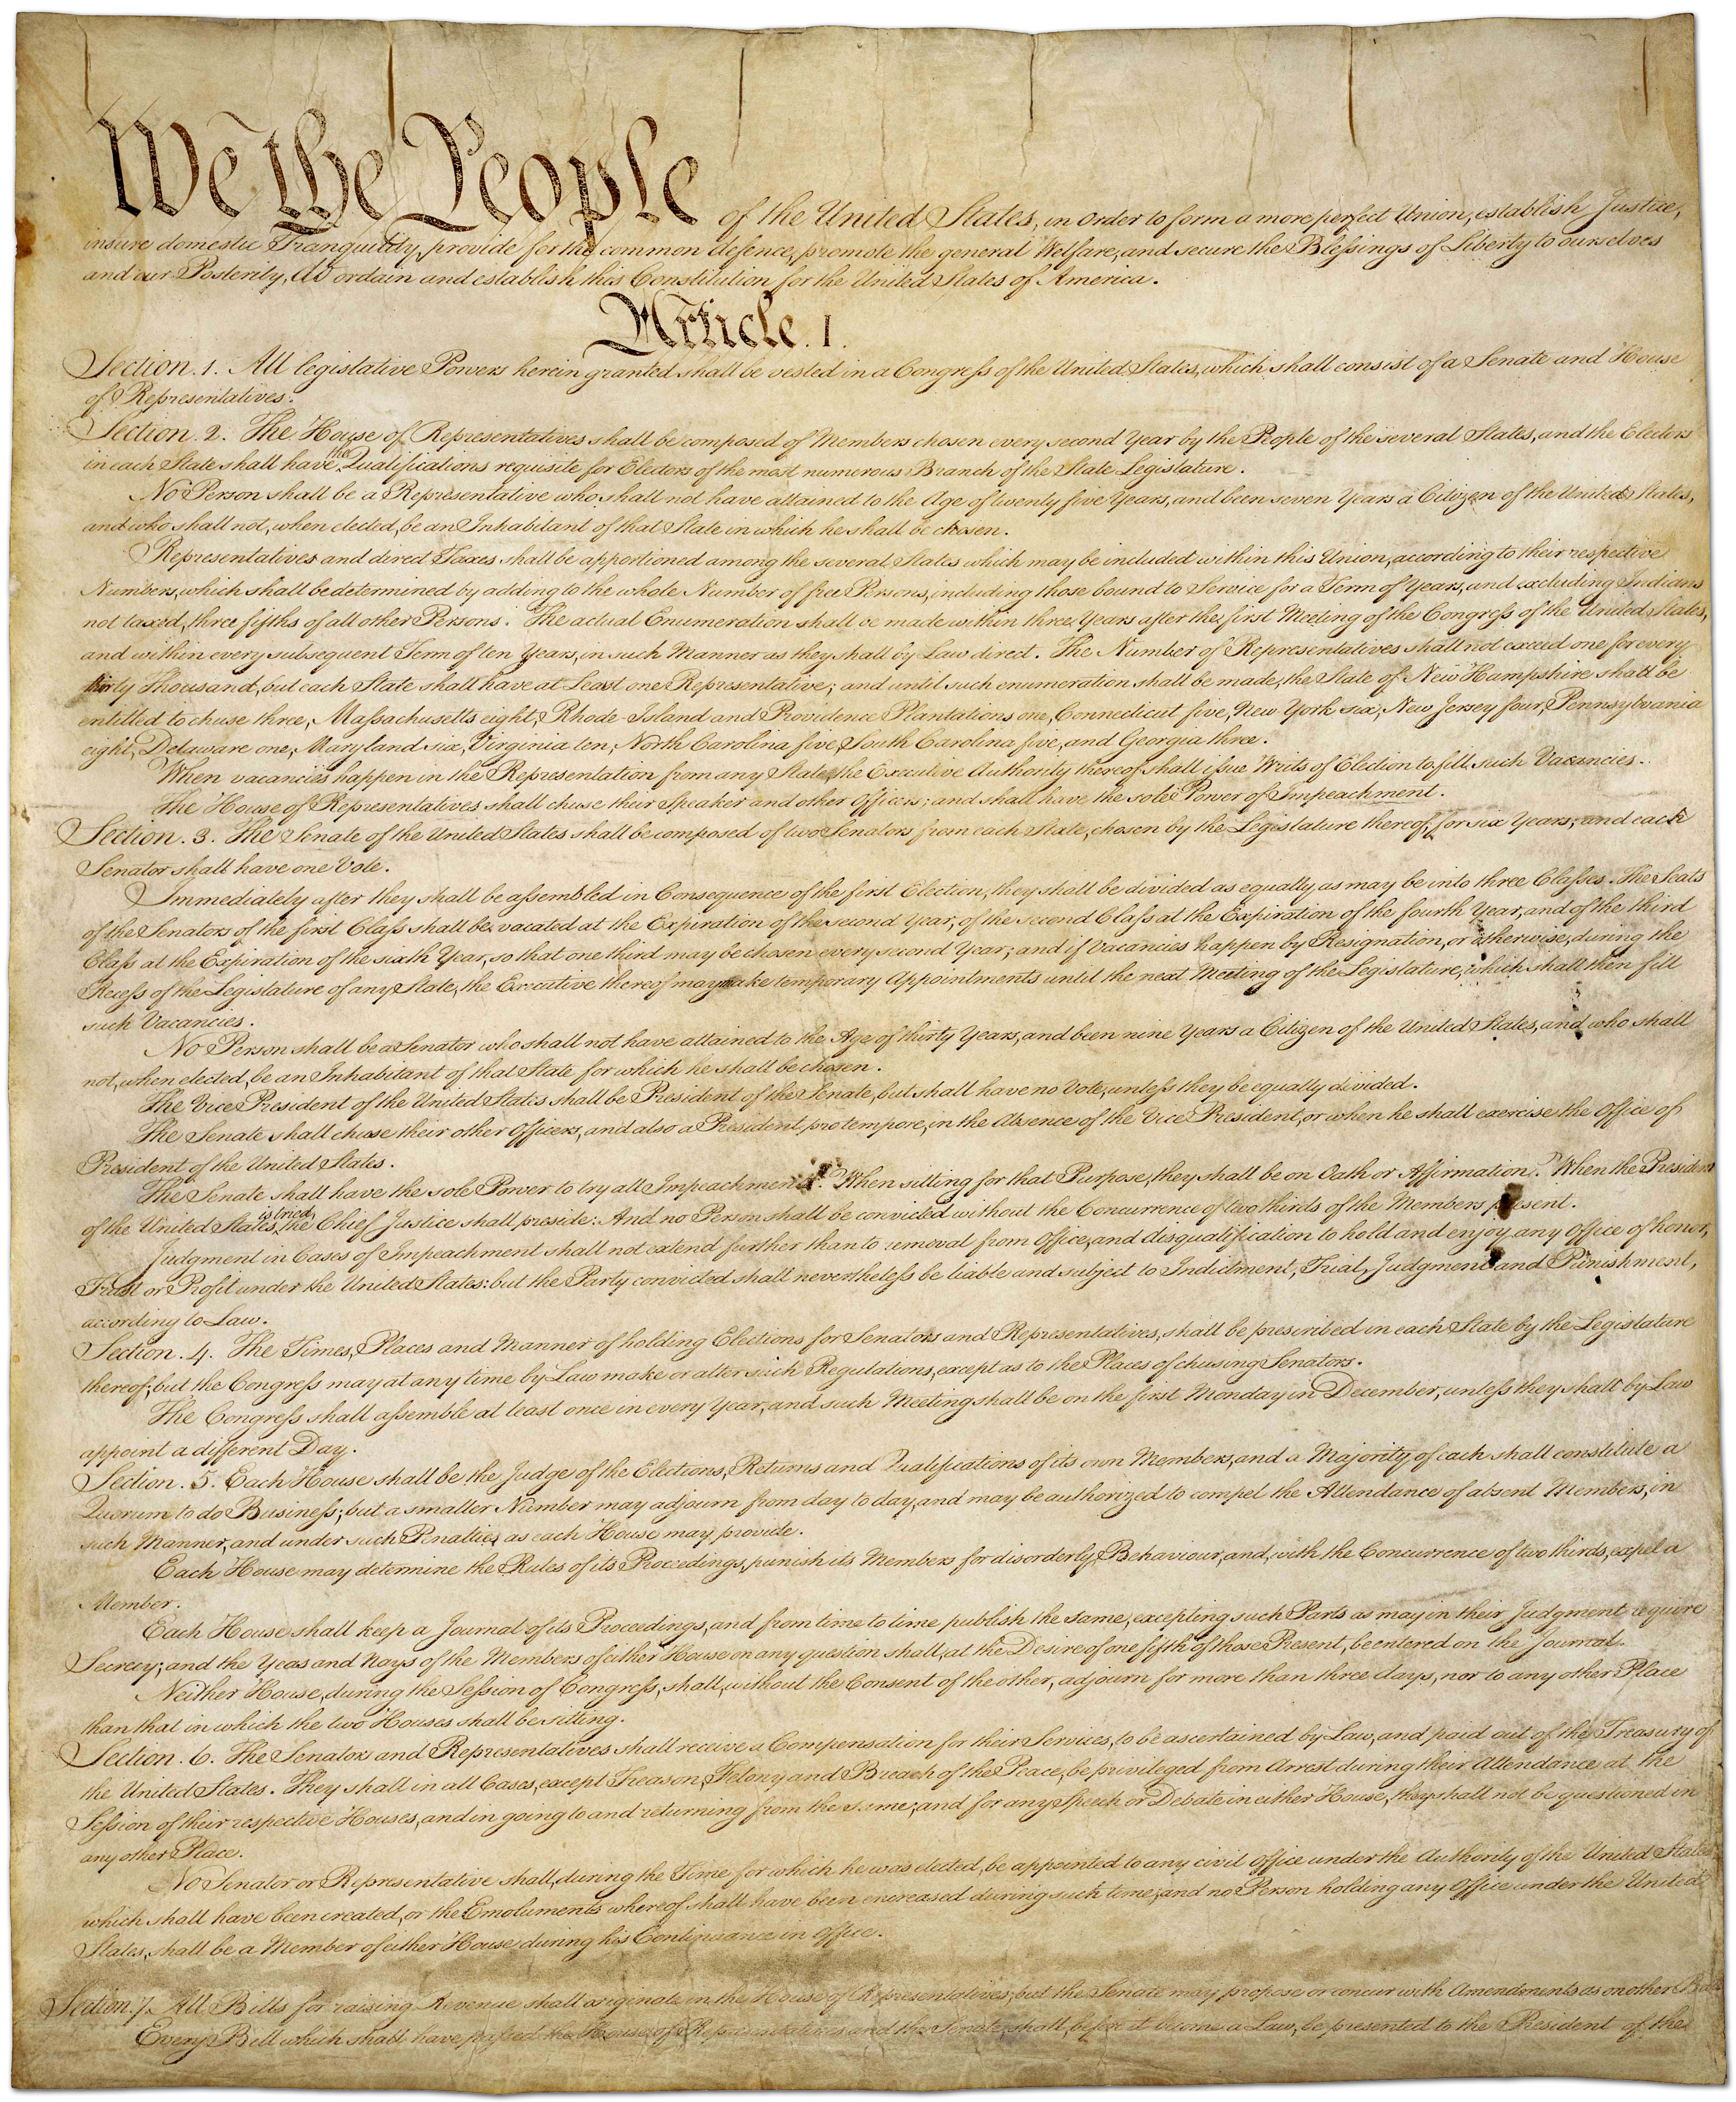 http://www.theindianreporter.com/historical_documents/archives/constitution_copies/ConstitutionFULL_p1.jpg